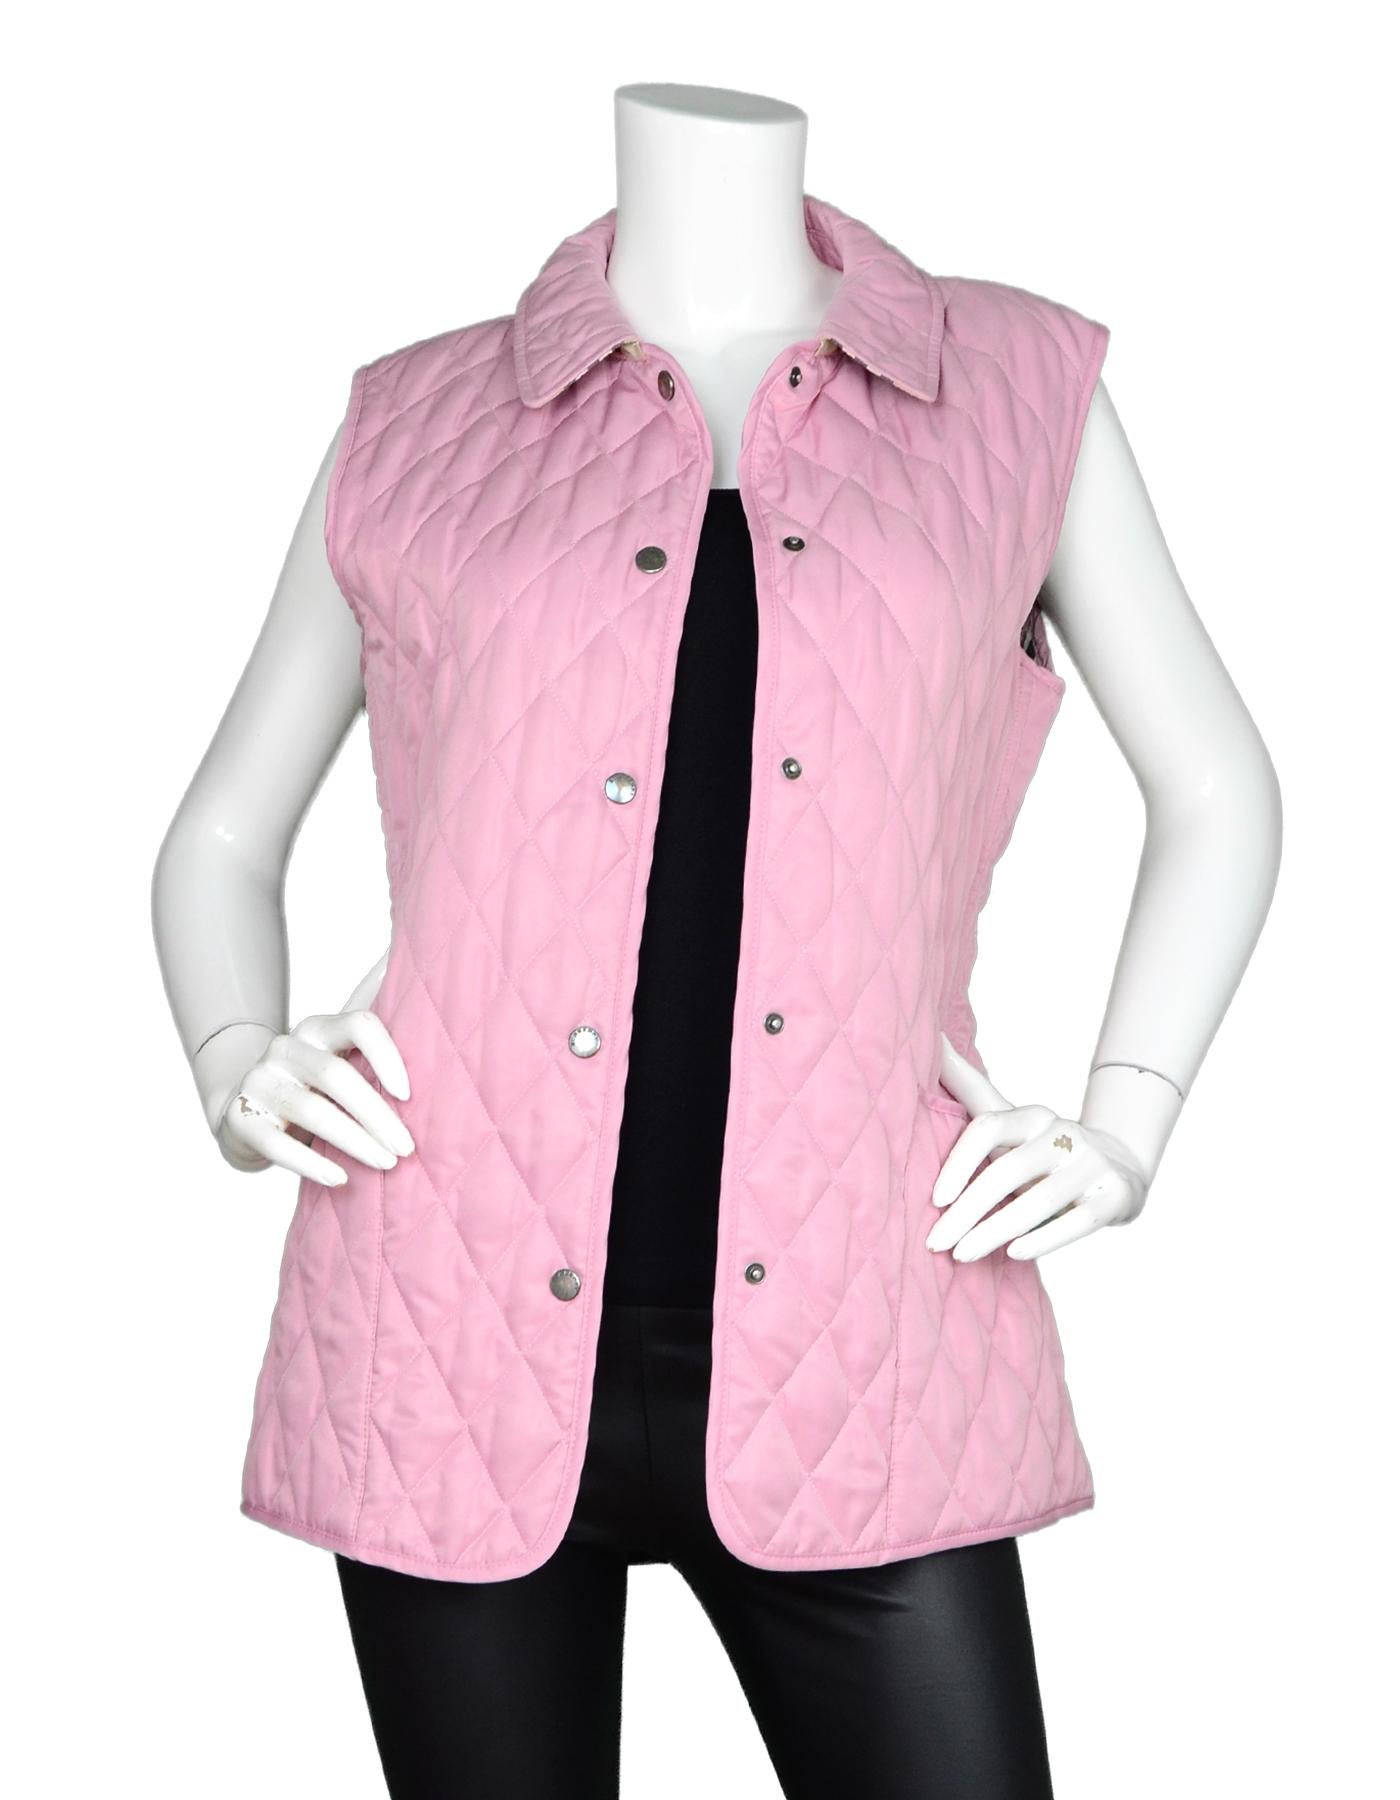 Burberry Pink Quilted Vest W/ Tartan/Plaid Interior Sz M

Made In: England
Color: Pink
Materials: 100% polyester
Lining: 50% cotton, 50% polyester 
Opening/Closure: Button front
Overall Condition: Excellent pre-owned condition with excpetion of some